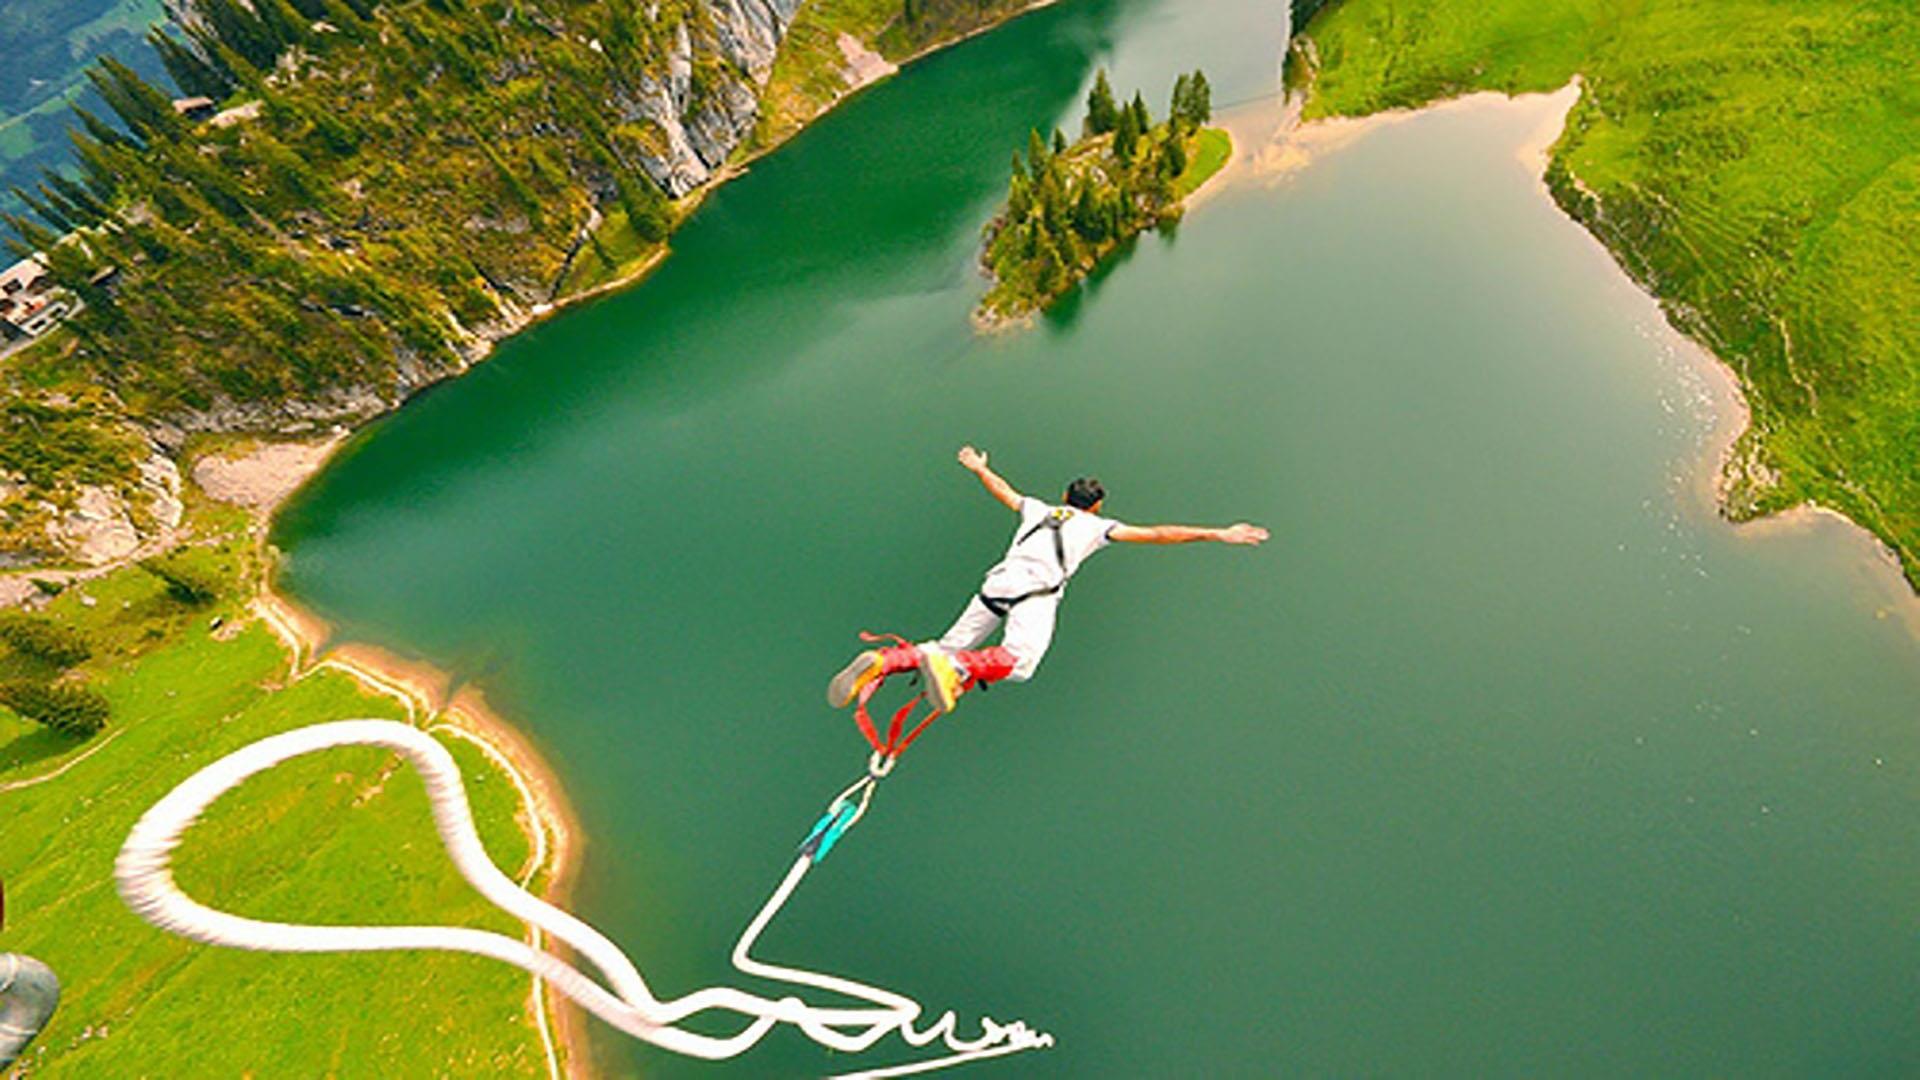 Bungee jump Extreme wallpaper for Android